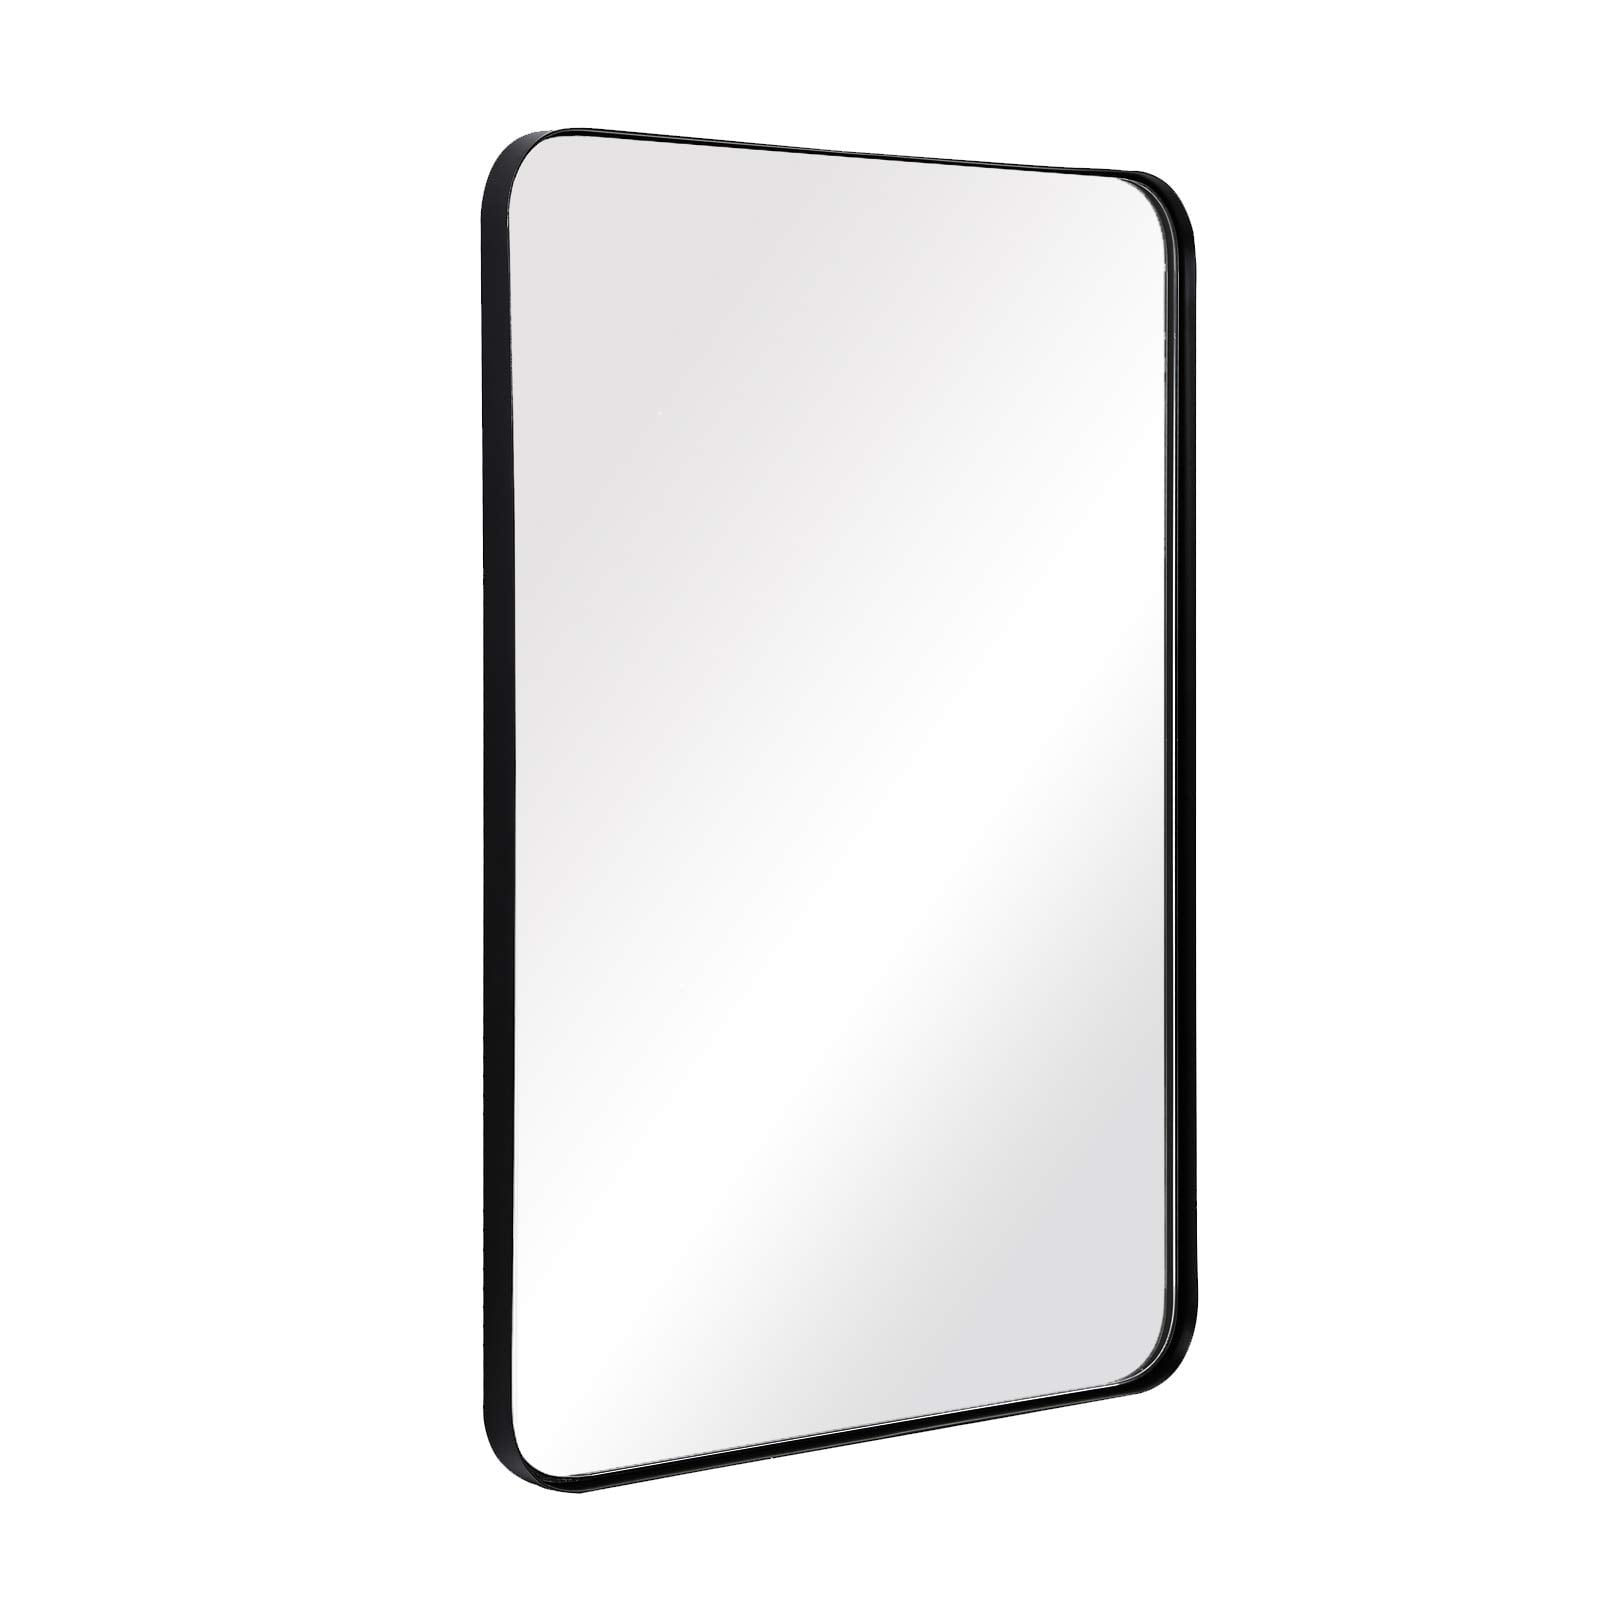 Stainless Steel Metal Frame with Rounded Corner ANDY STAR Wall Mirror for Bathroom 24x36 Inch Black Bathroom Mirror Rectangle Glass Panel Wall Mounted Mirror Decorative for Bathroom